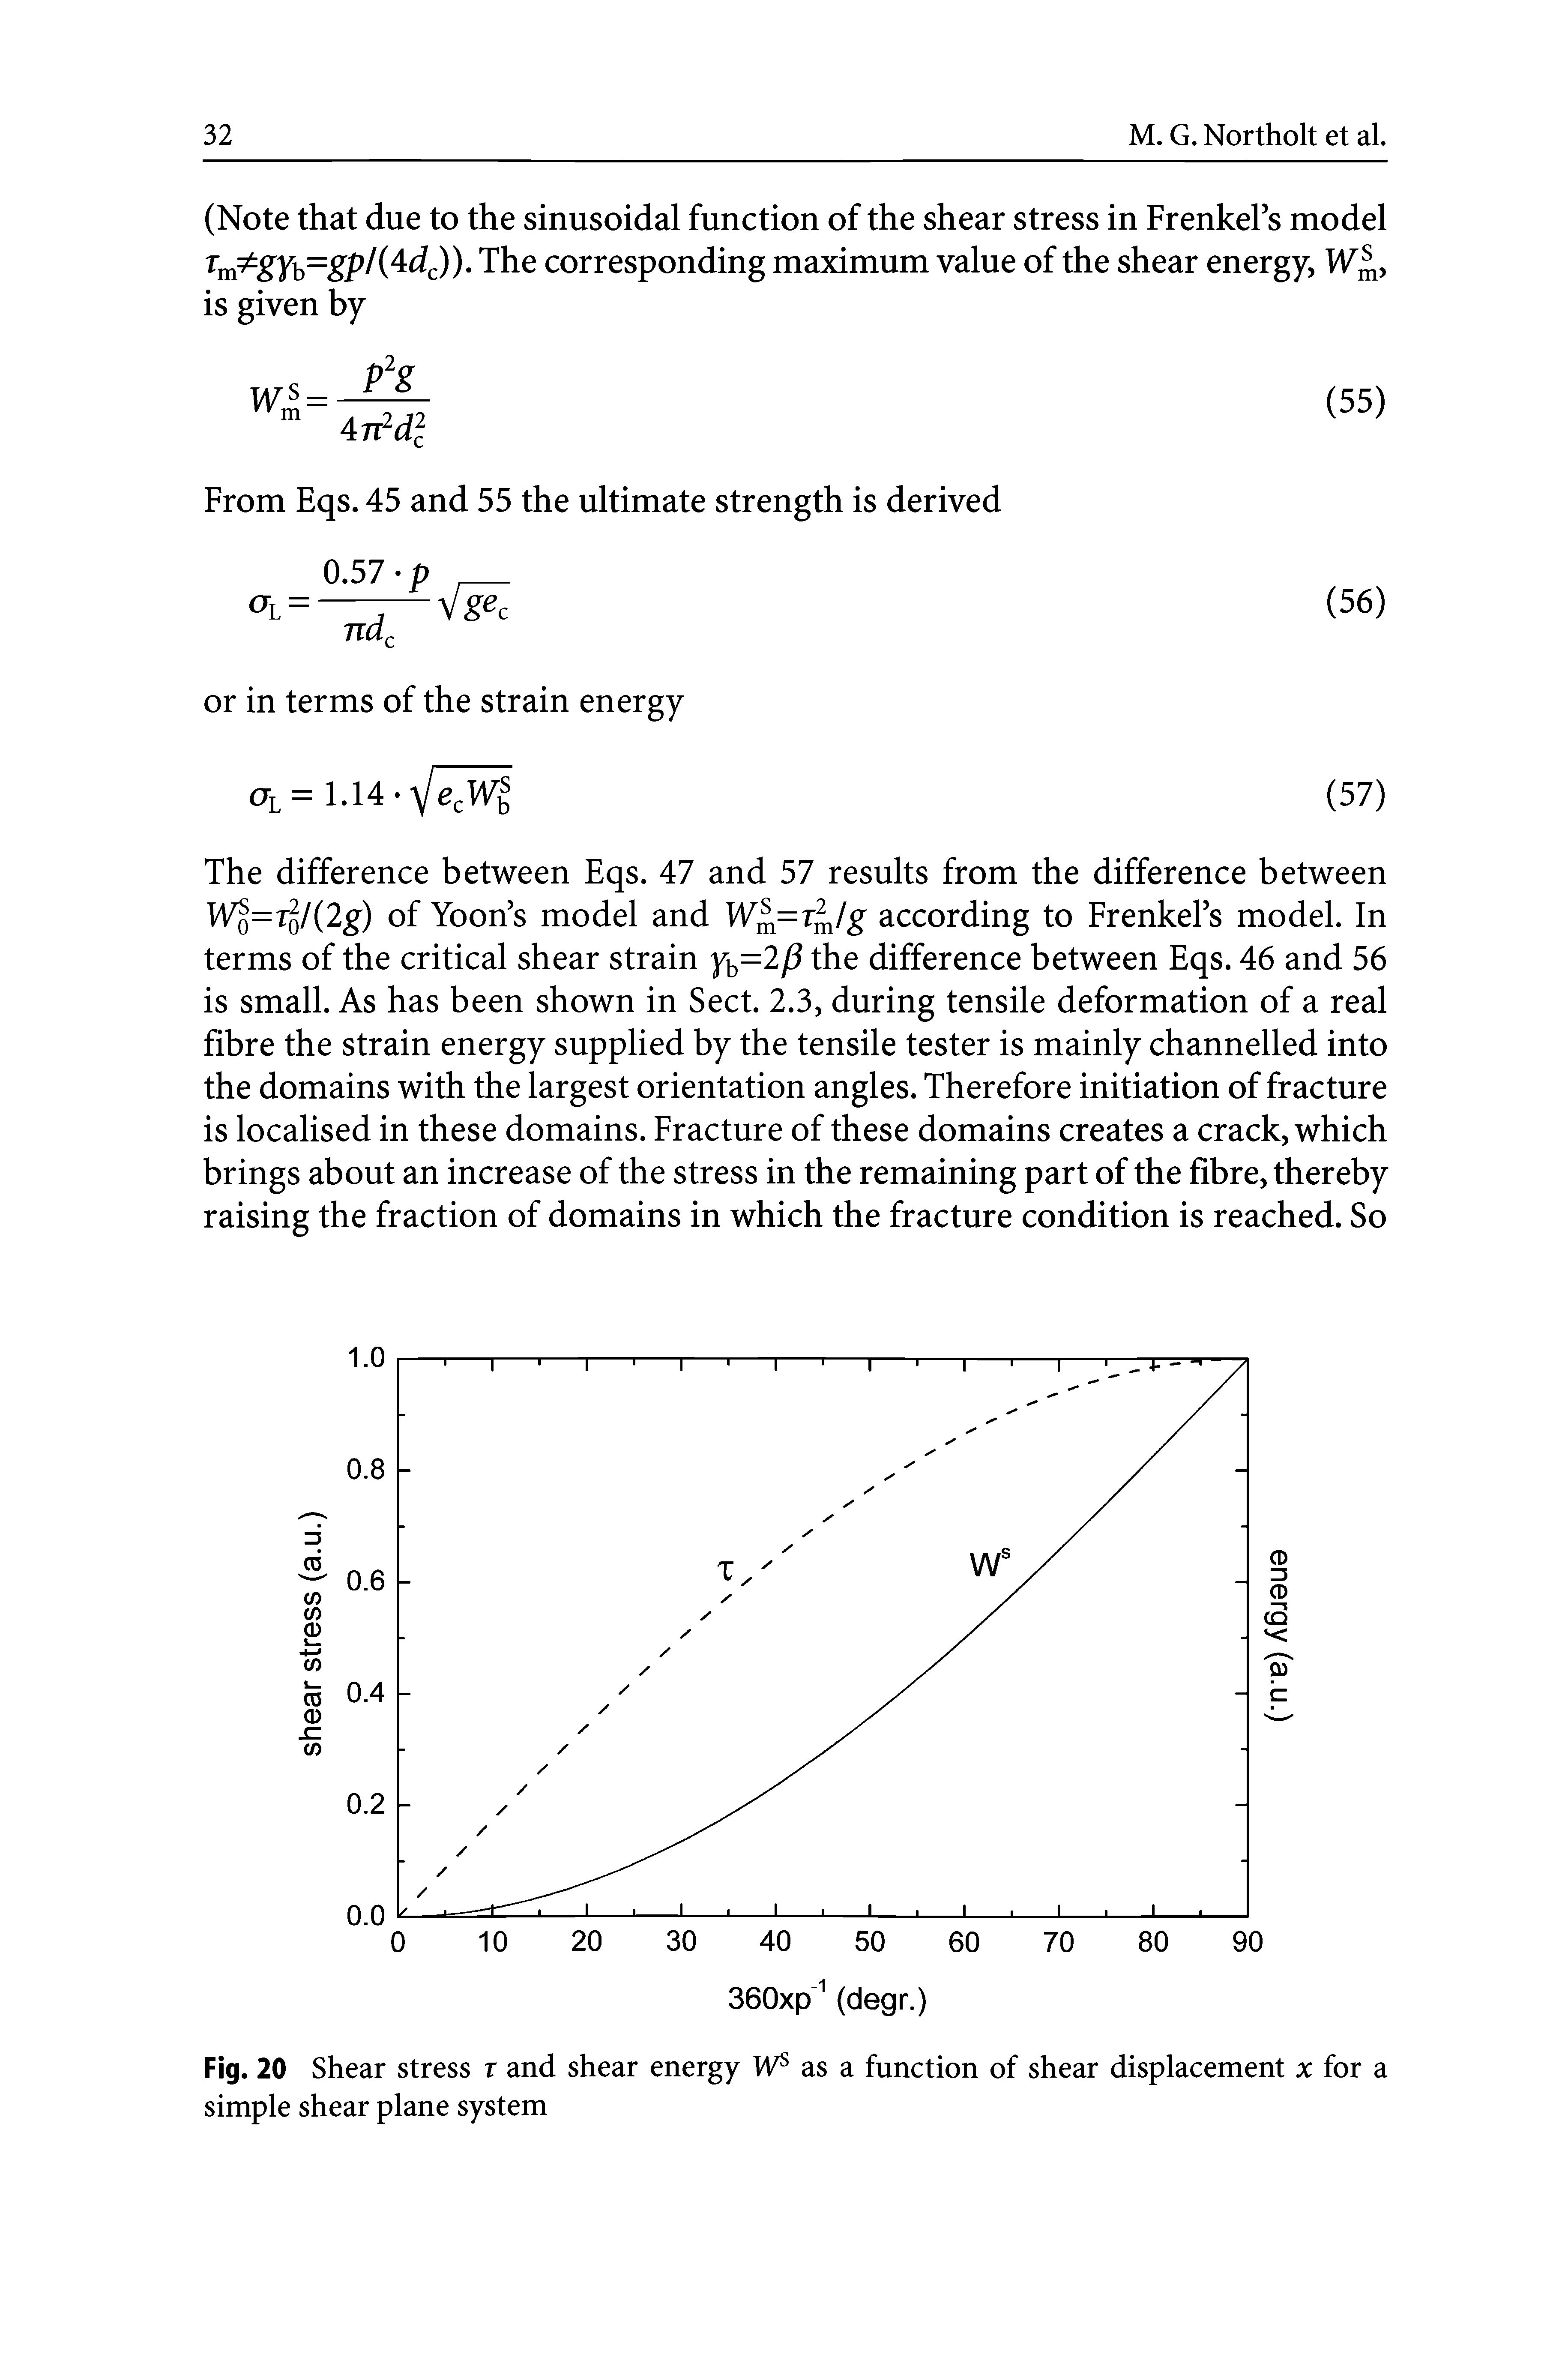 Fig. 20 Shear stress r and shear energy as a function of shear displacement x for a simple shear plane system...